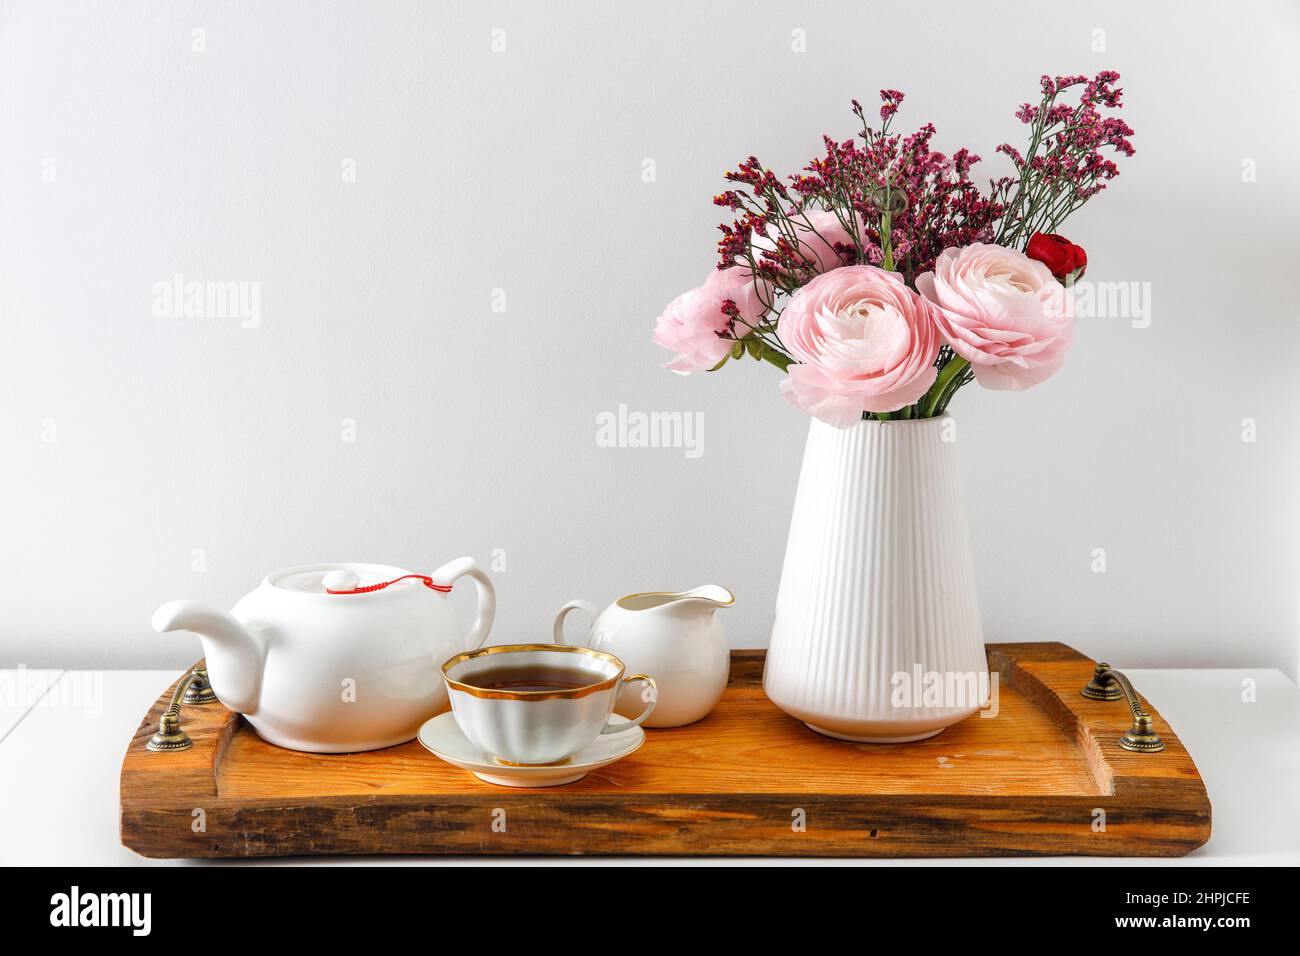 Persian pink buttercup with the wooden brown tray on a white table. Time to drink tea. Ceramic teapot and two porcelain cups. Copy space Stock Photo